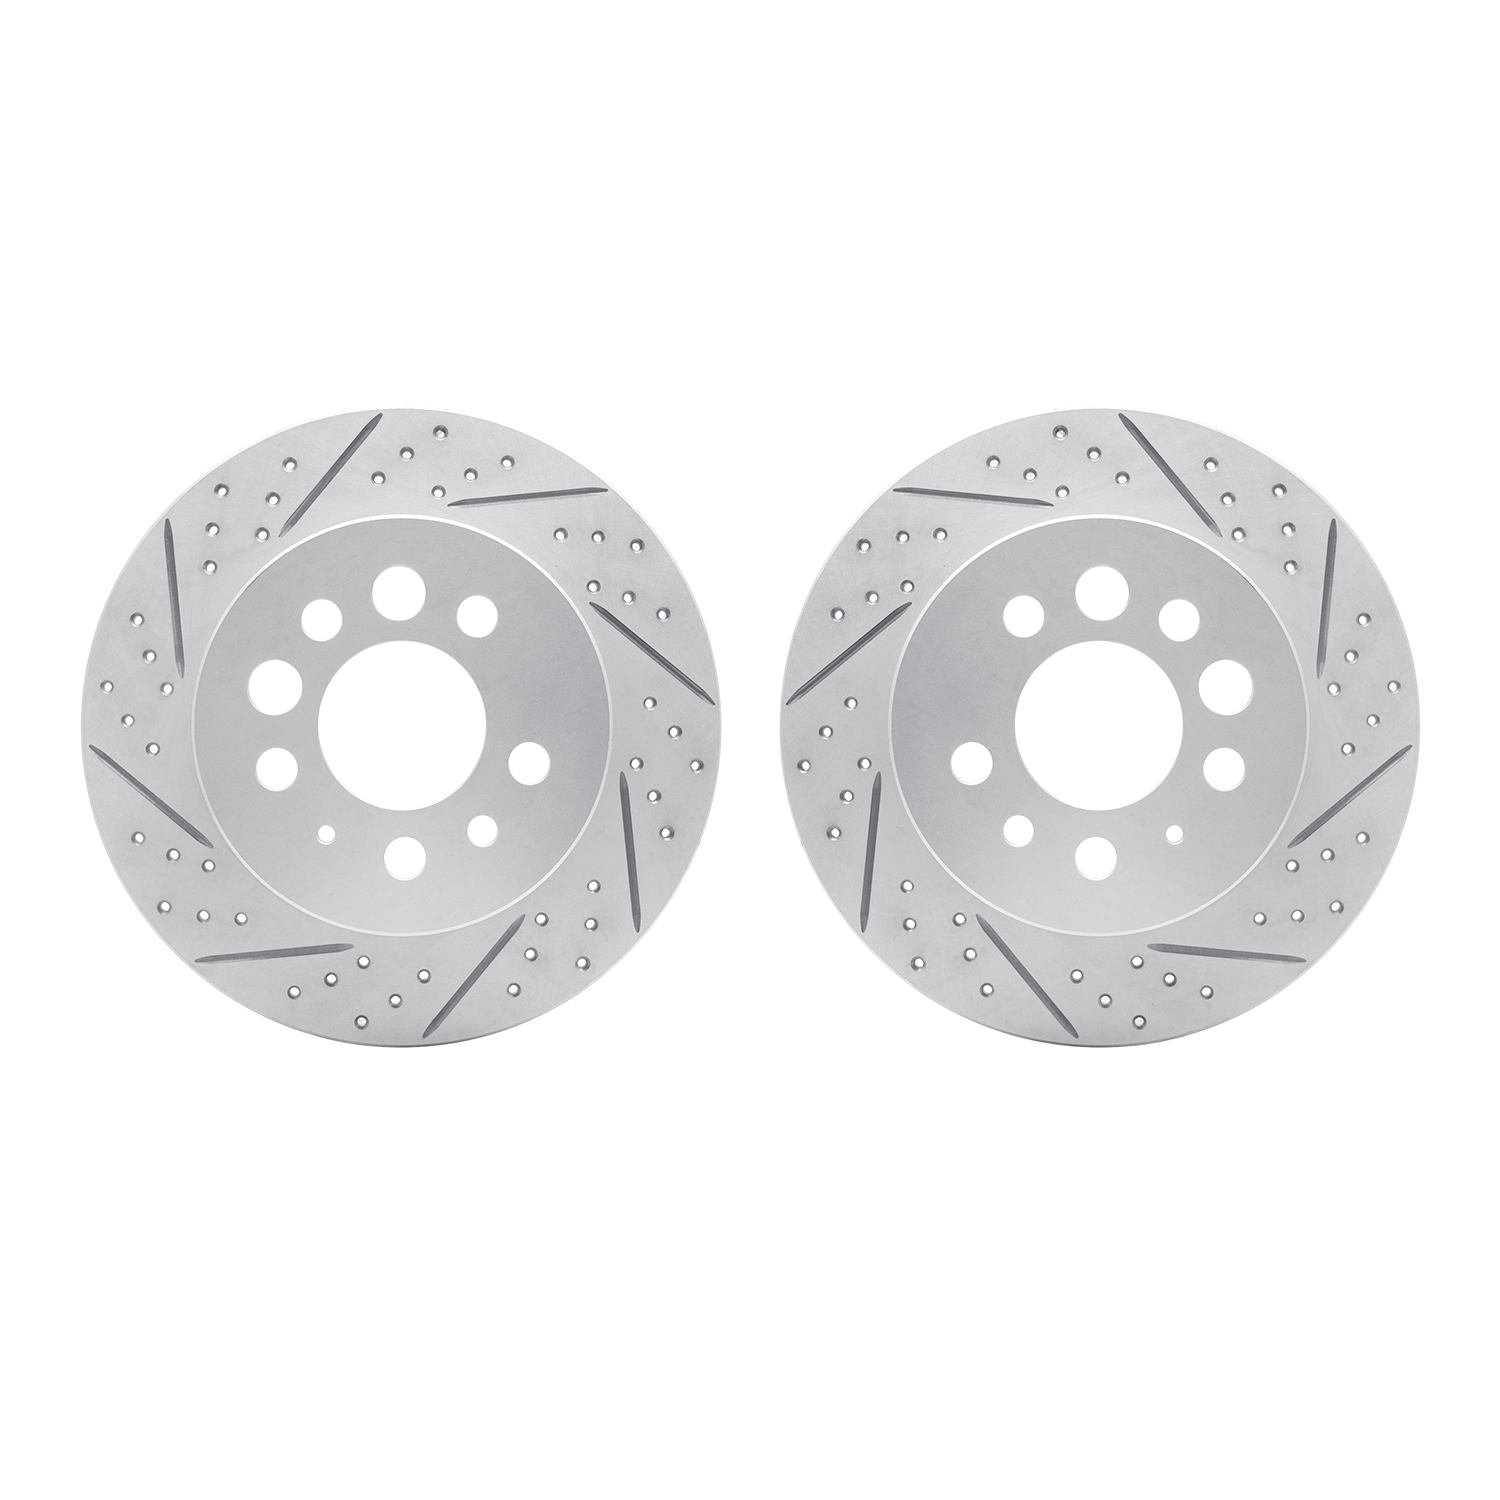 2002-27022 Geoperformance Drilled/Slotted Brake Rotors, 1974-1997 Volvo, Position: Rear